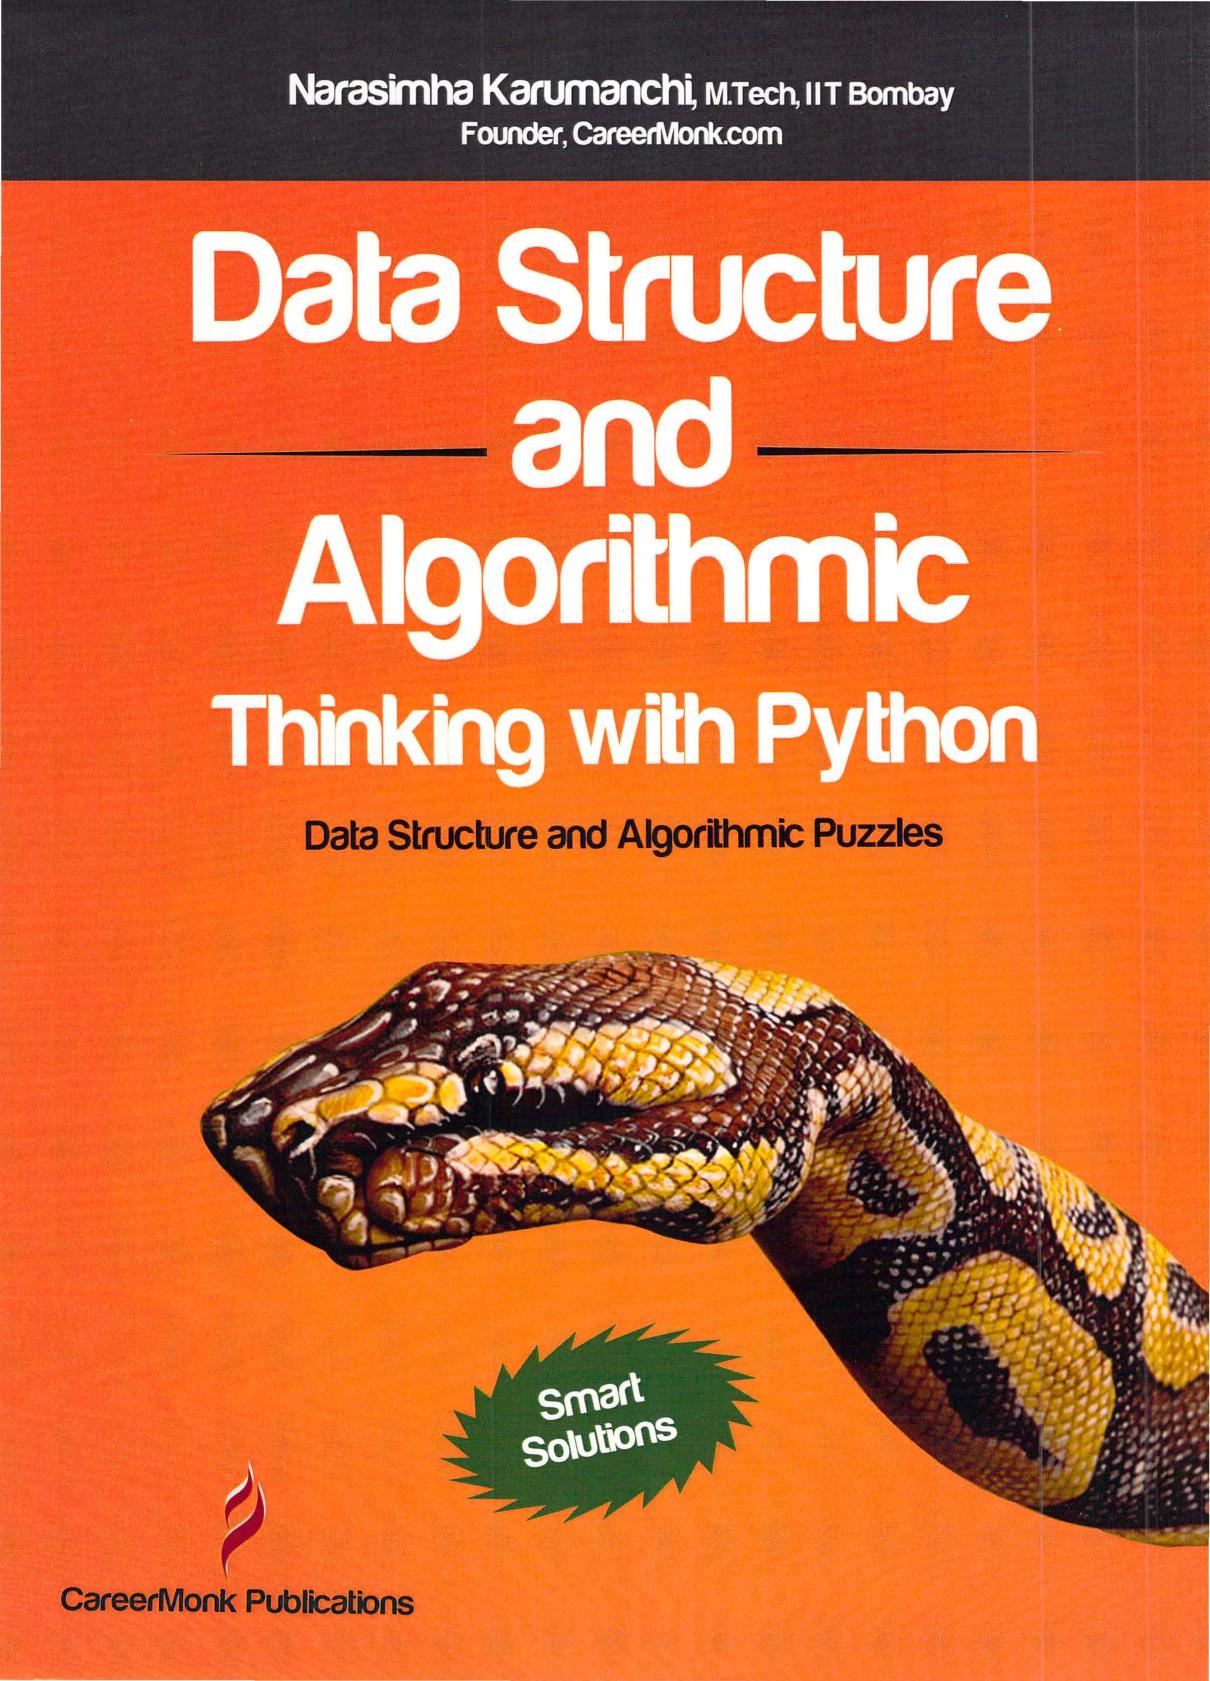 Data Structure and Algorithmic Thinking with Python Data Structure and Algorithmic Puzzles by Narasimha Karumanchi